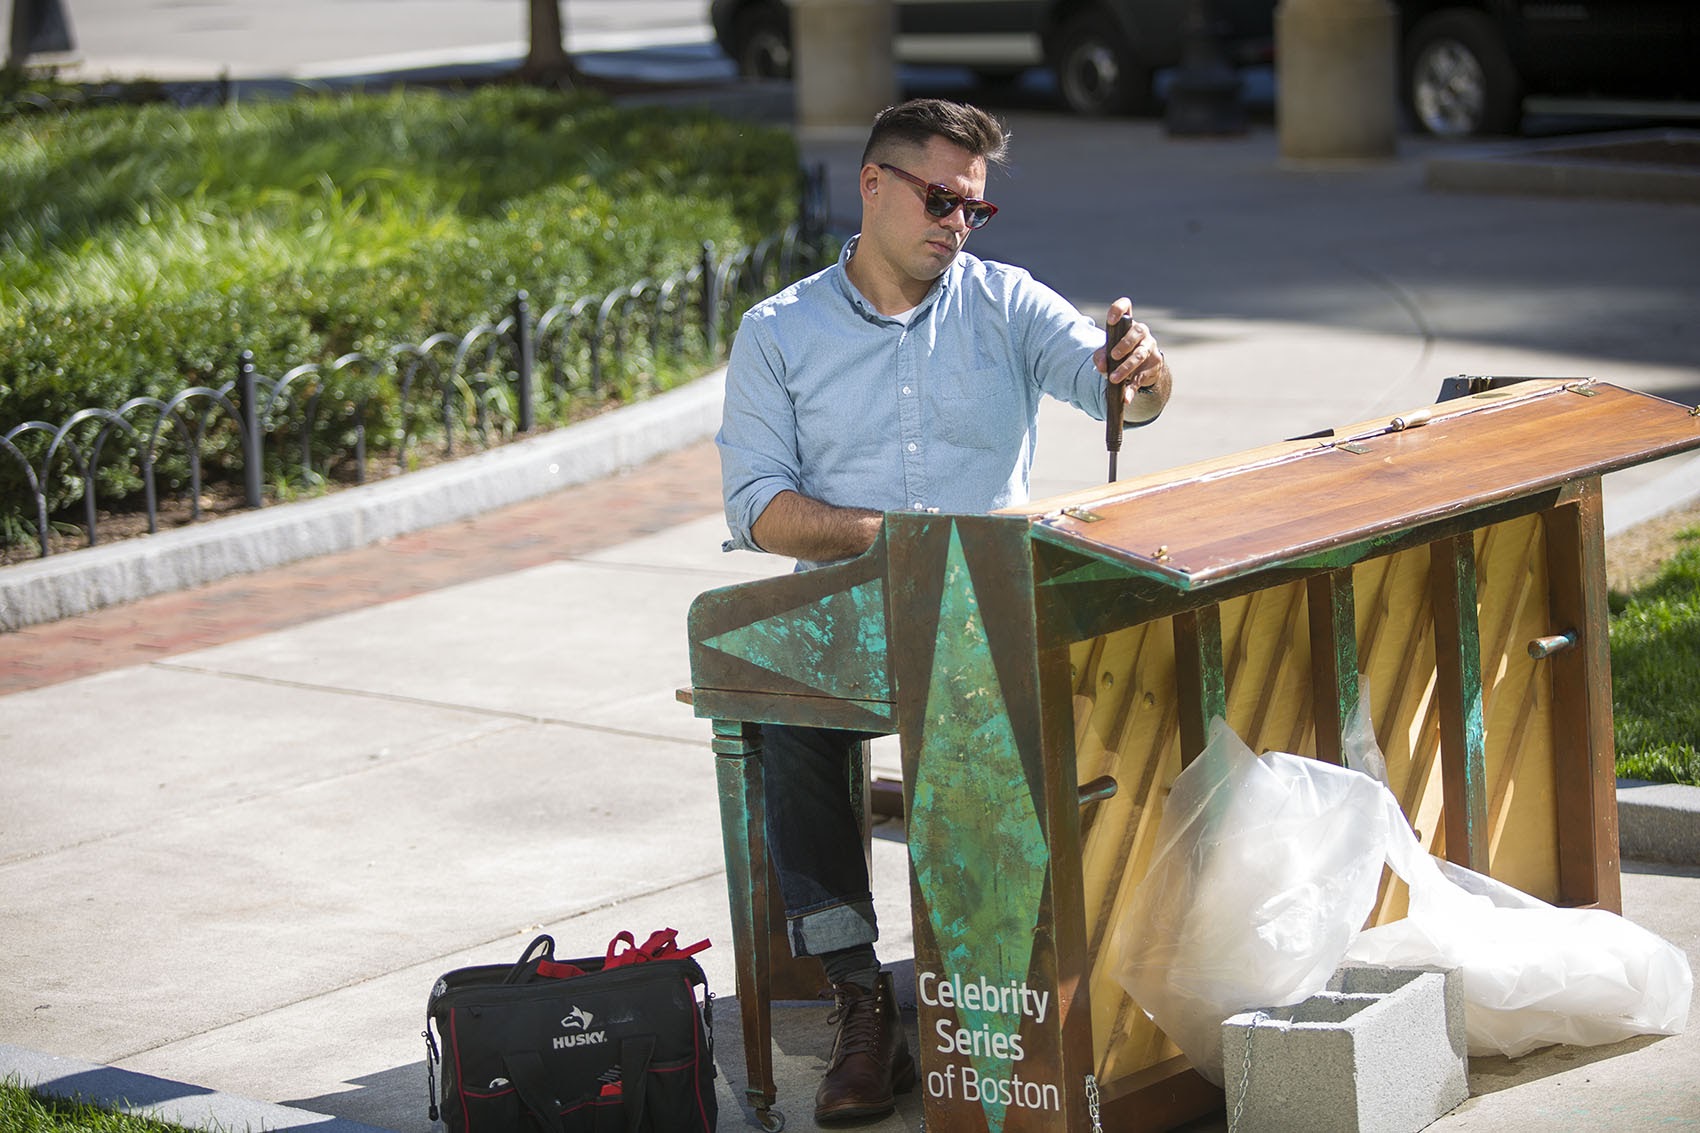 Piano technician Michael Wilson tunes one of the &quot;Play Me, I'm Yours&quot; pianos, this one in Statler Park near the Park Plaza Hotel in Boston. (Jesse Costa/WBUR)